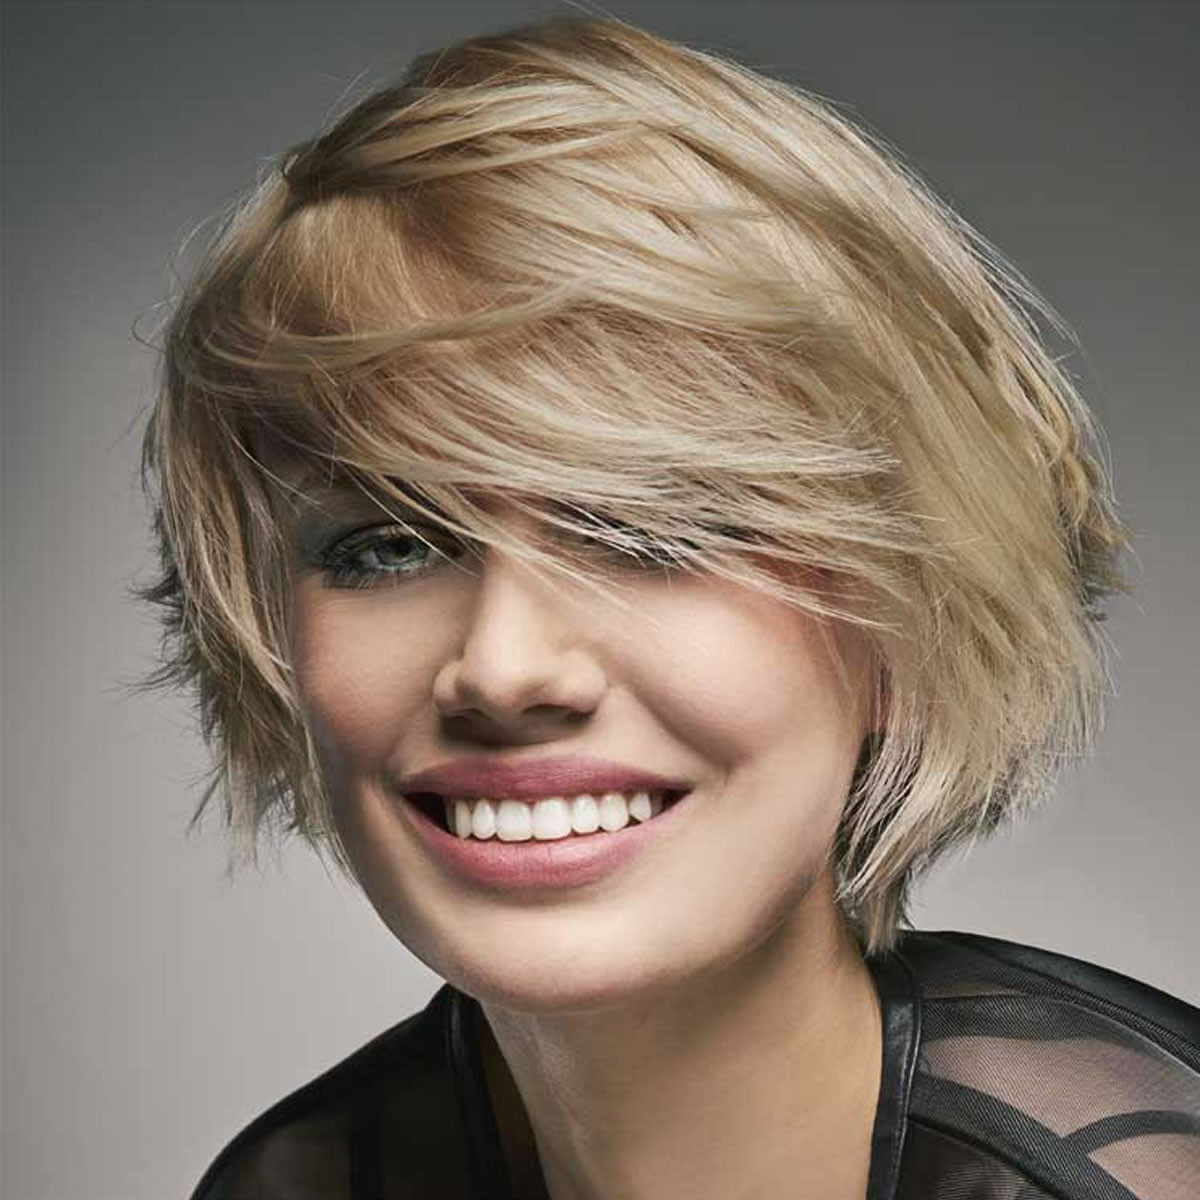 Short Bob Hairstyle
 The Best 30 Short Bob Haircuts – 2018 Short Hairstyles for